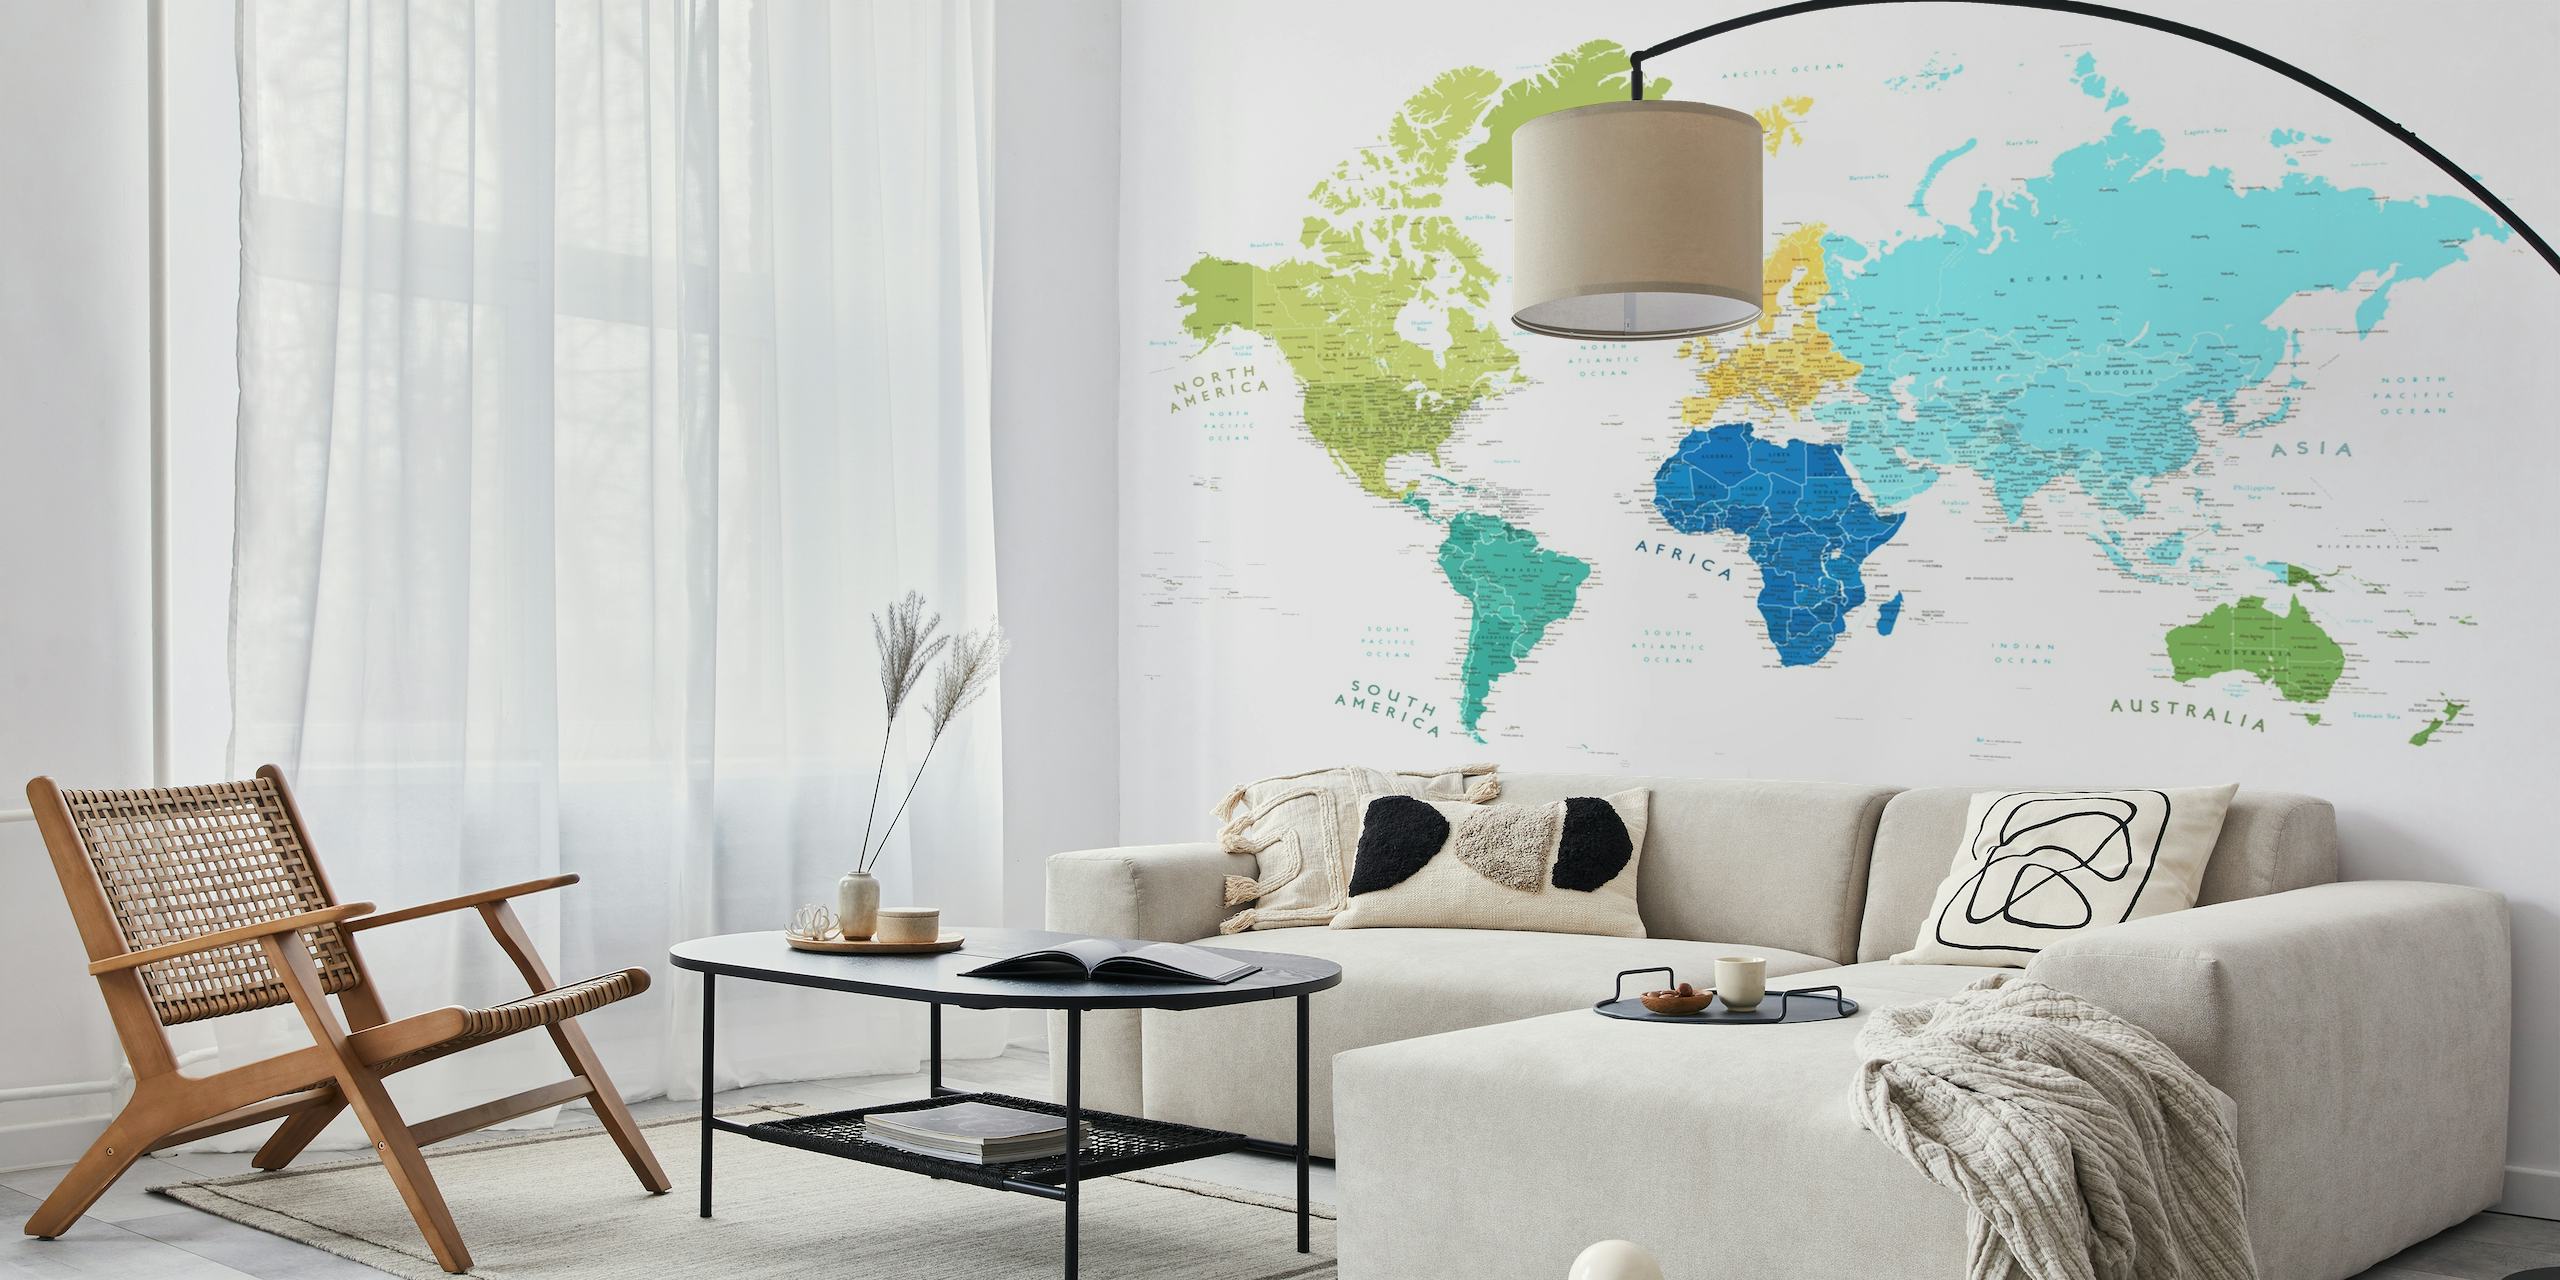 Colorful world map wall mural featuring Antarctica prominently with distinct colors for each continent